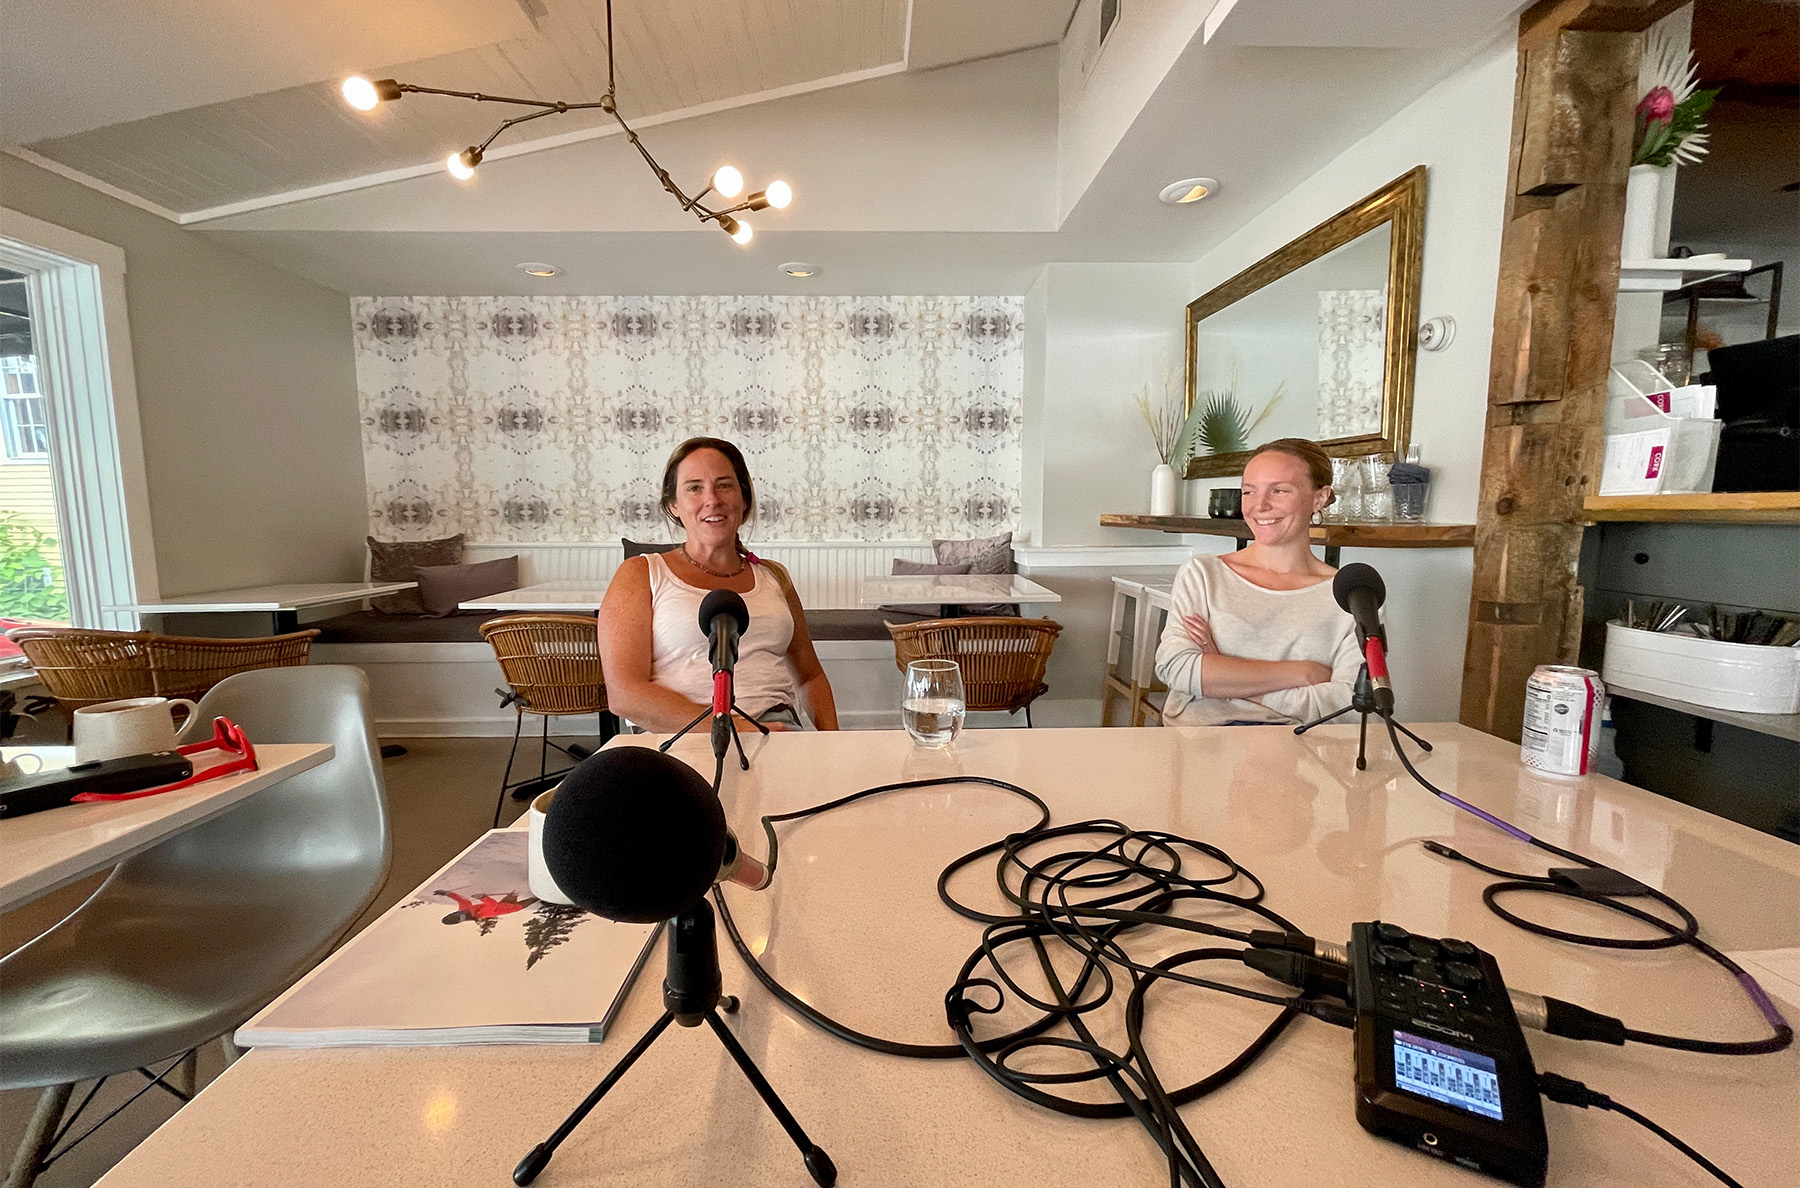 On our latest CRAFTED podcast, we talk with Danielle and Katie Nichols, the two amazing sisters behind CORK Restaurant & Natural Wine Shop. Danielle and Katie provide a fantastic introduction and overview of natural wine; explain how they got into it; and they tell us about “Twinkie Wines,” too.